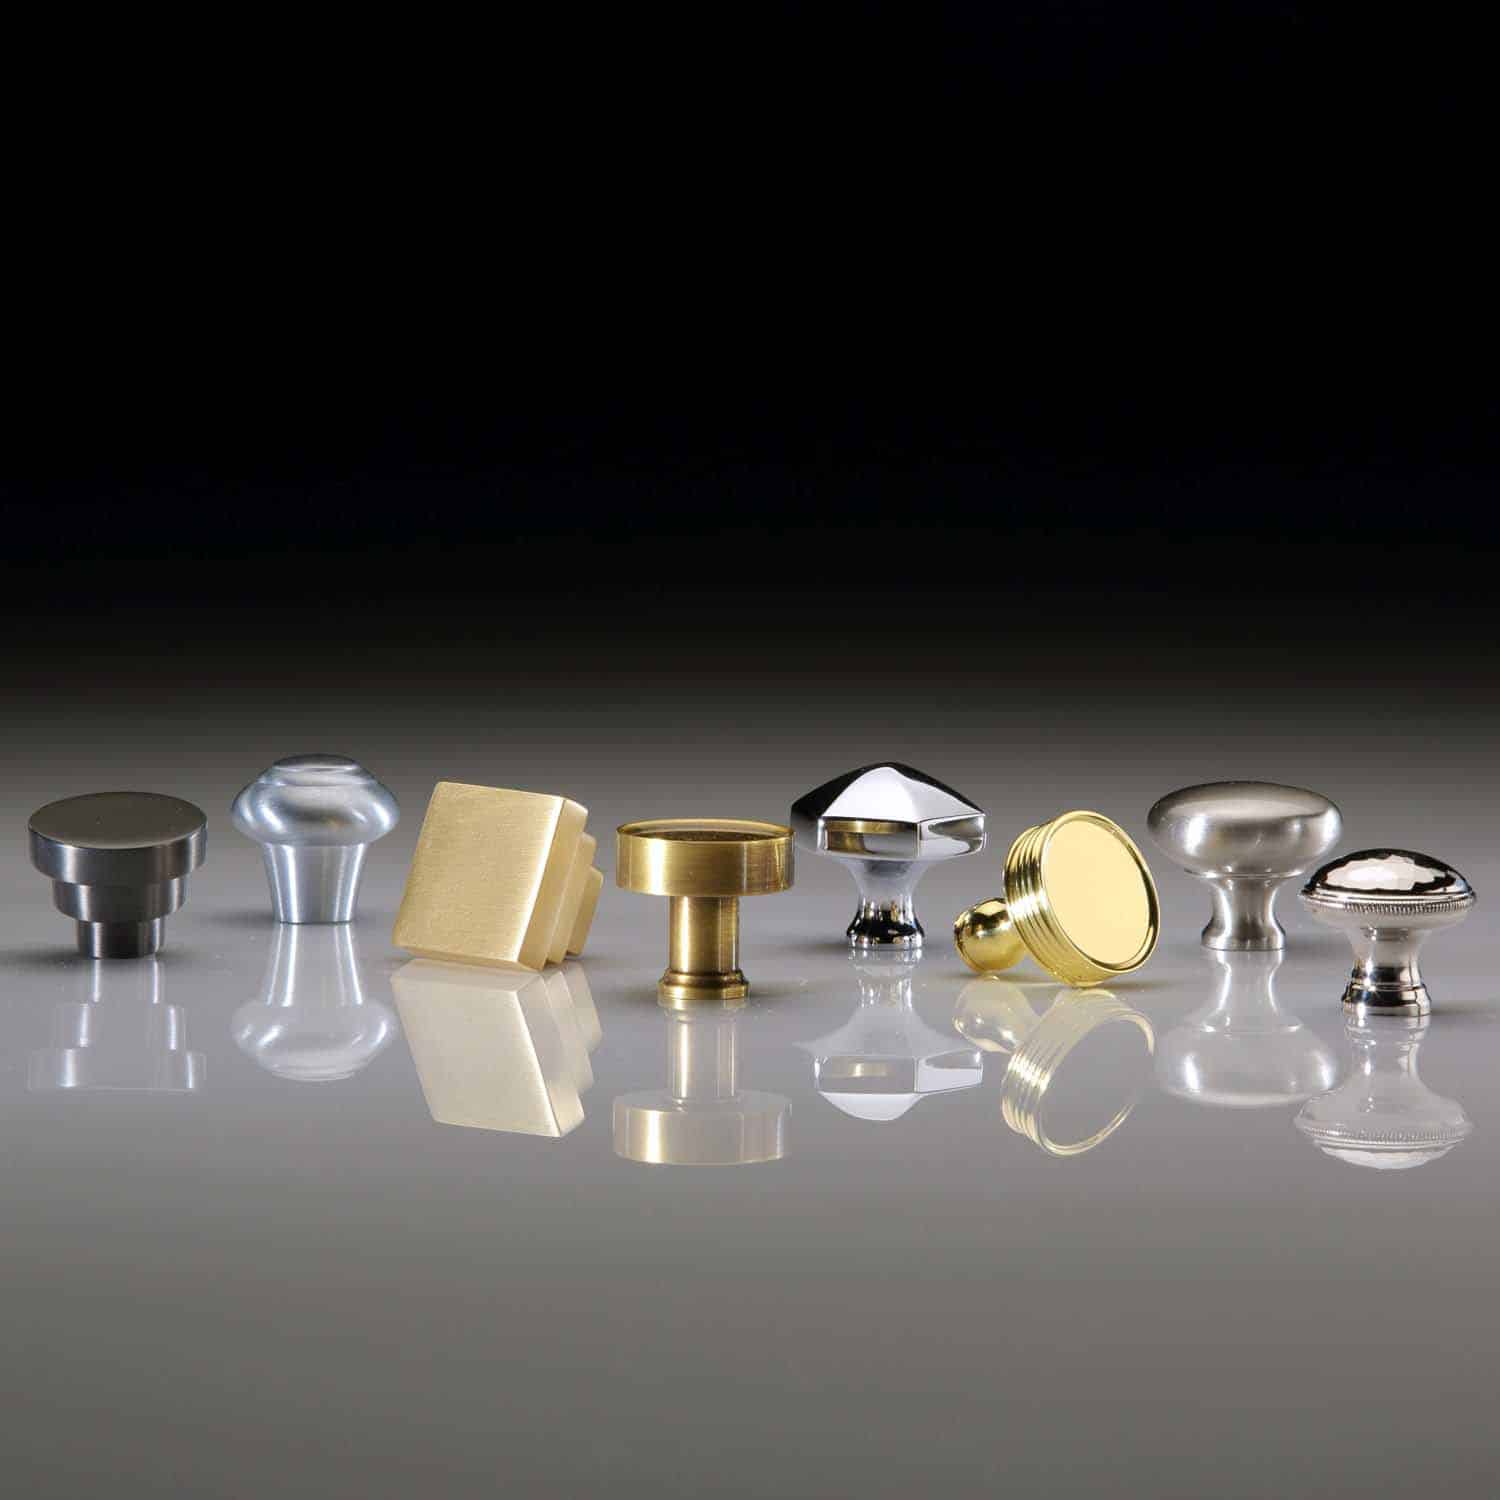 Cabinet Knobs - Category